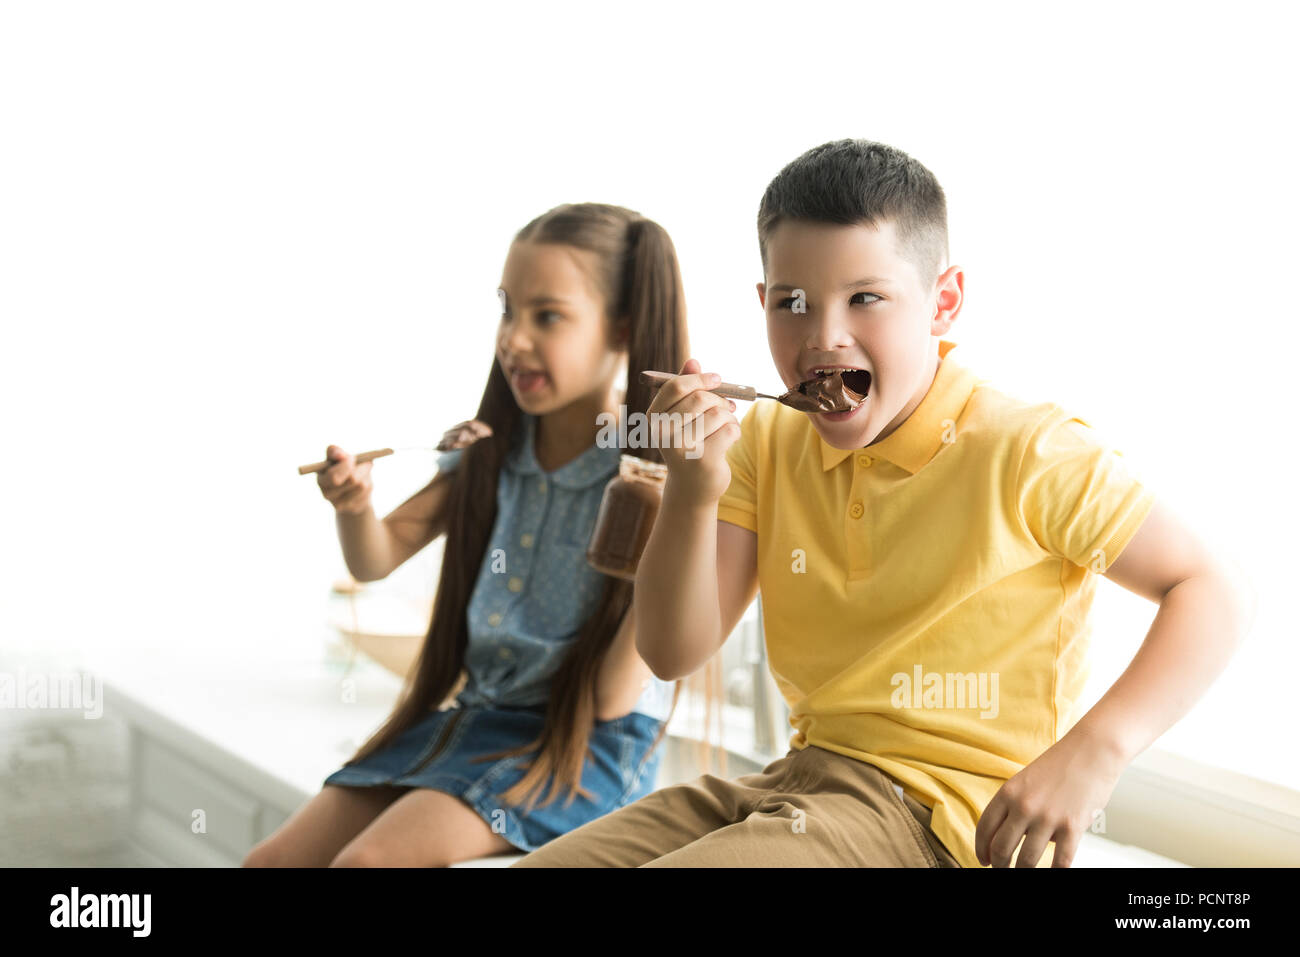 siblings eating chocolate together in kitchen Stock Photo